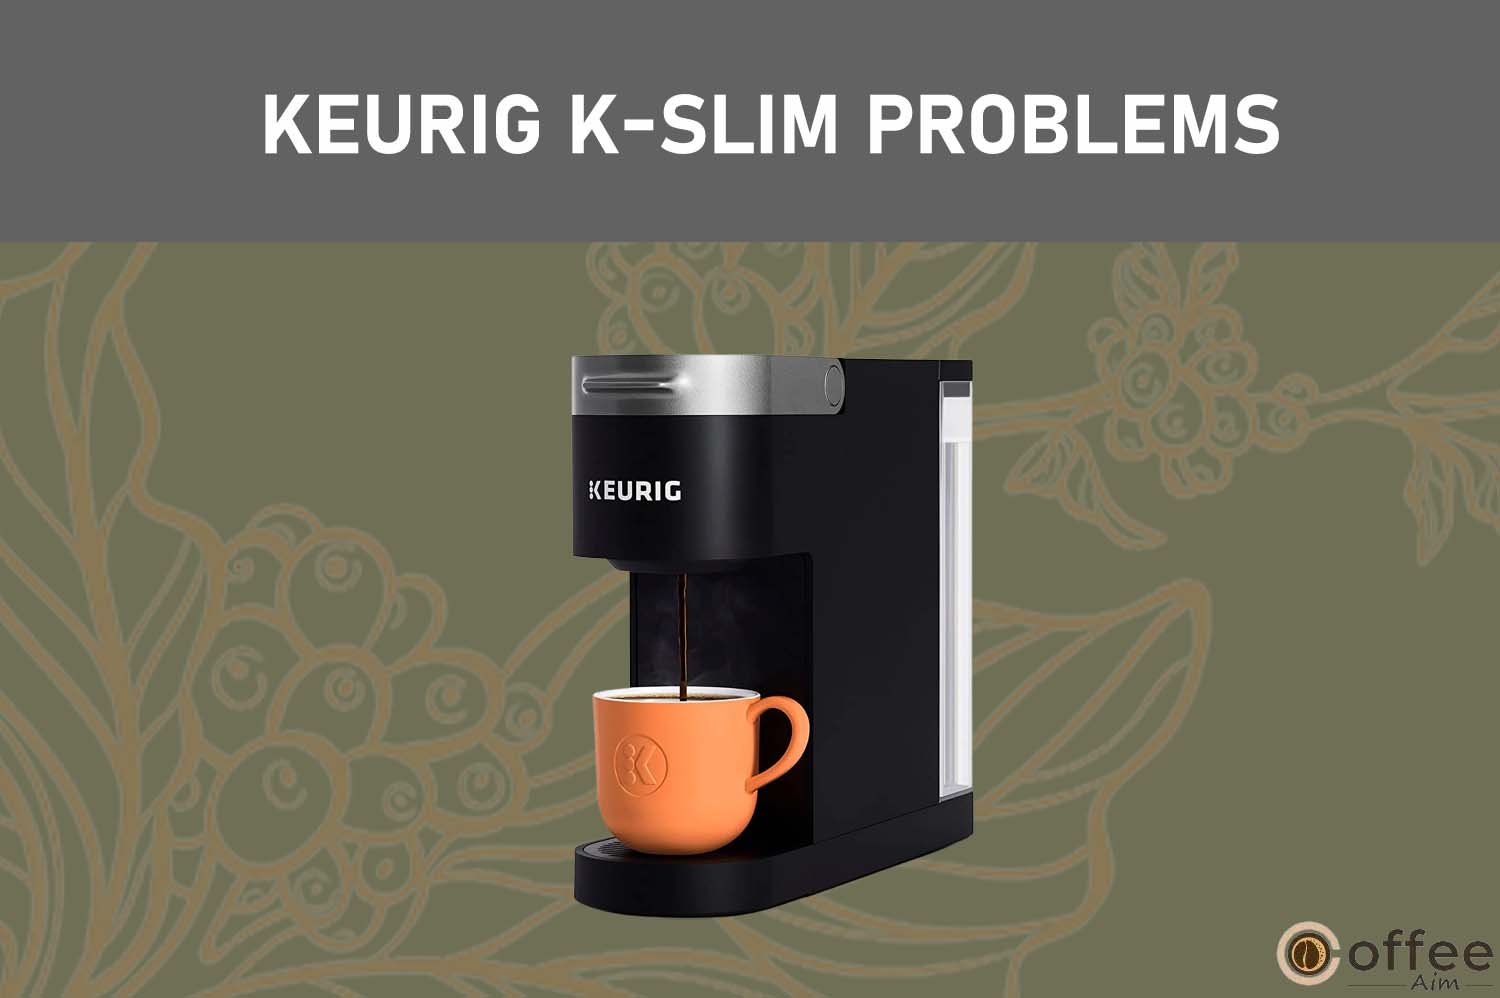 Feature Image for the article "Keurig K-Slim problems"